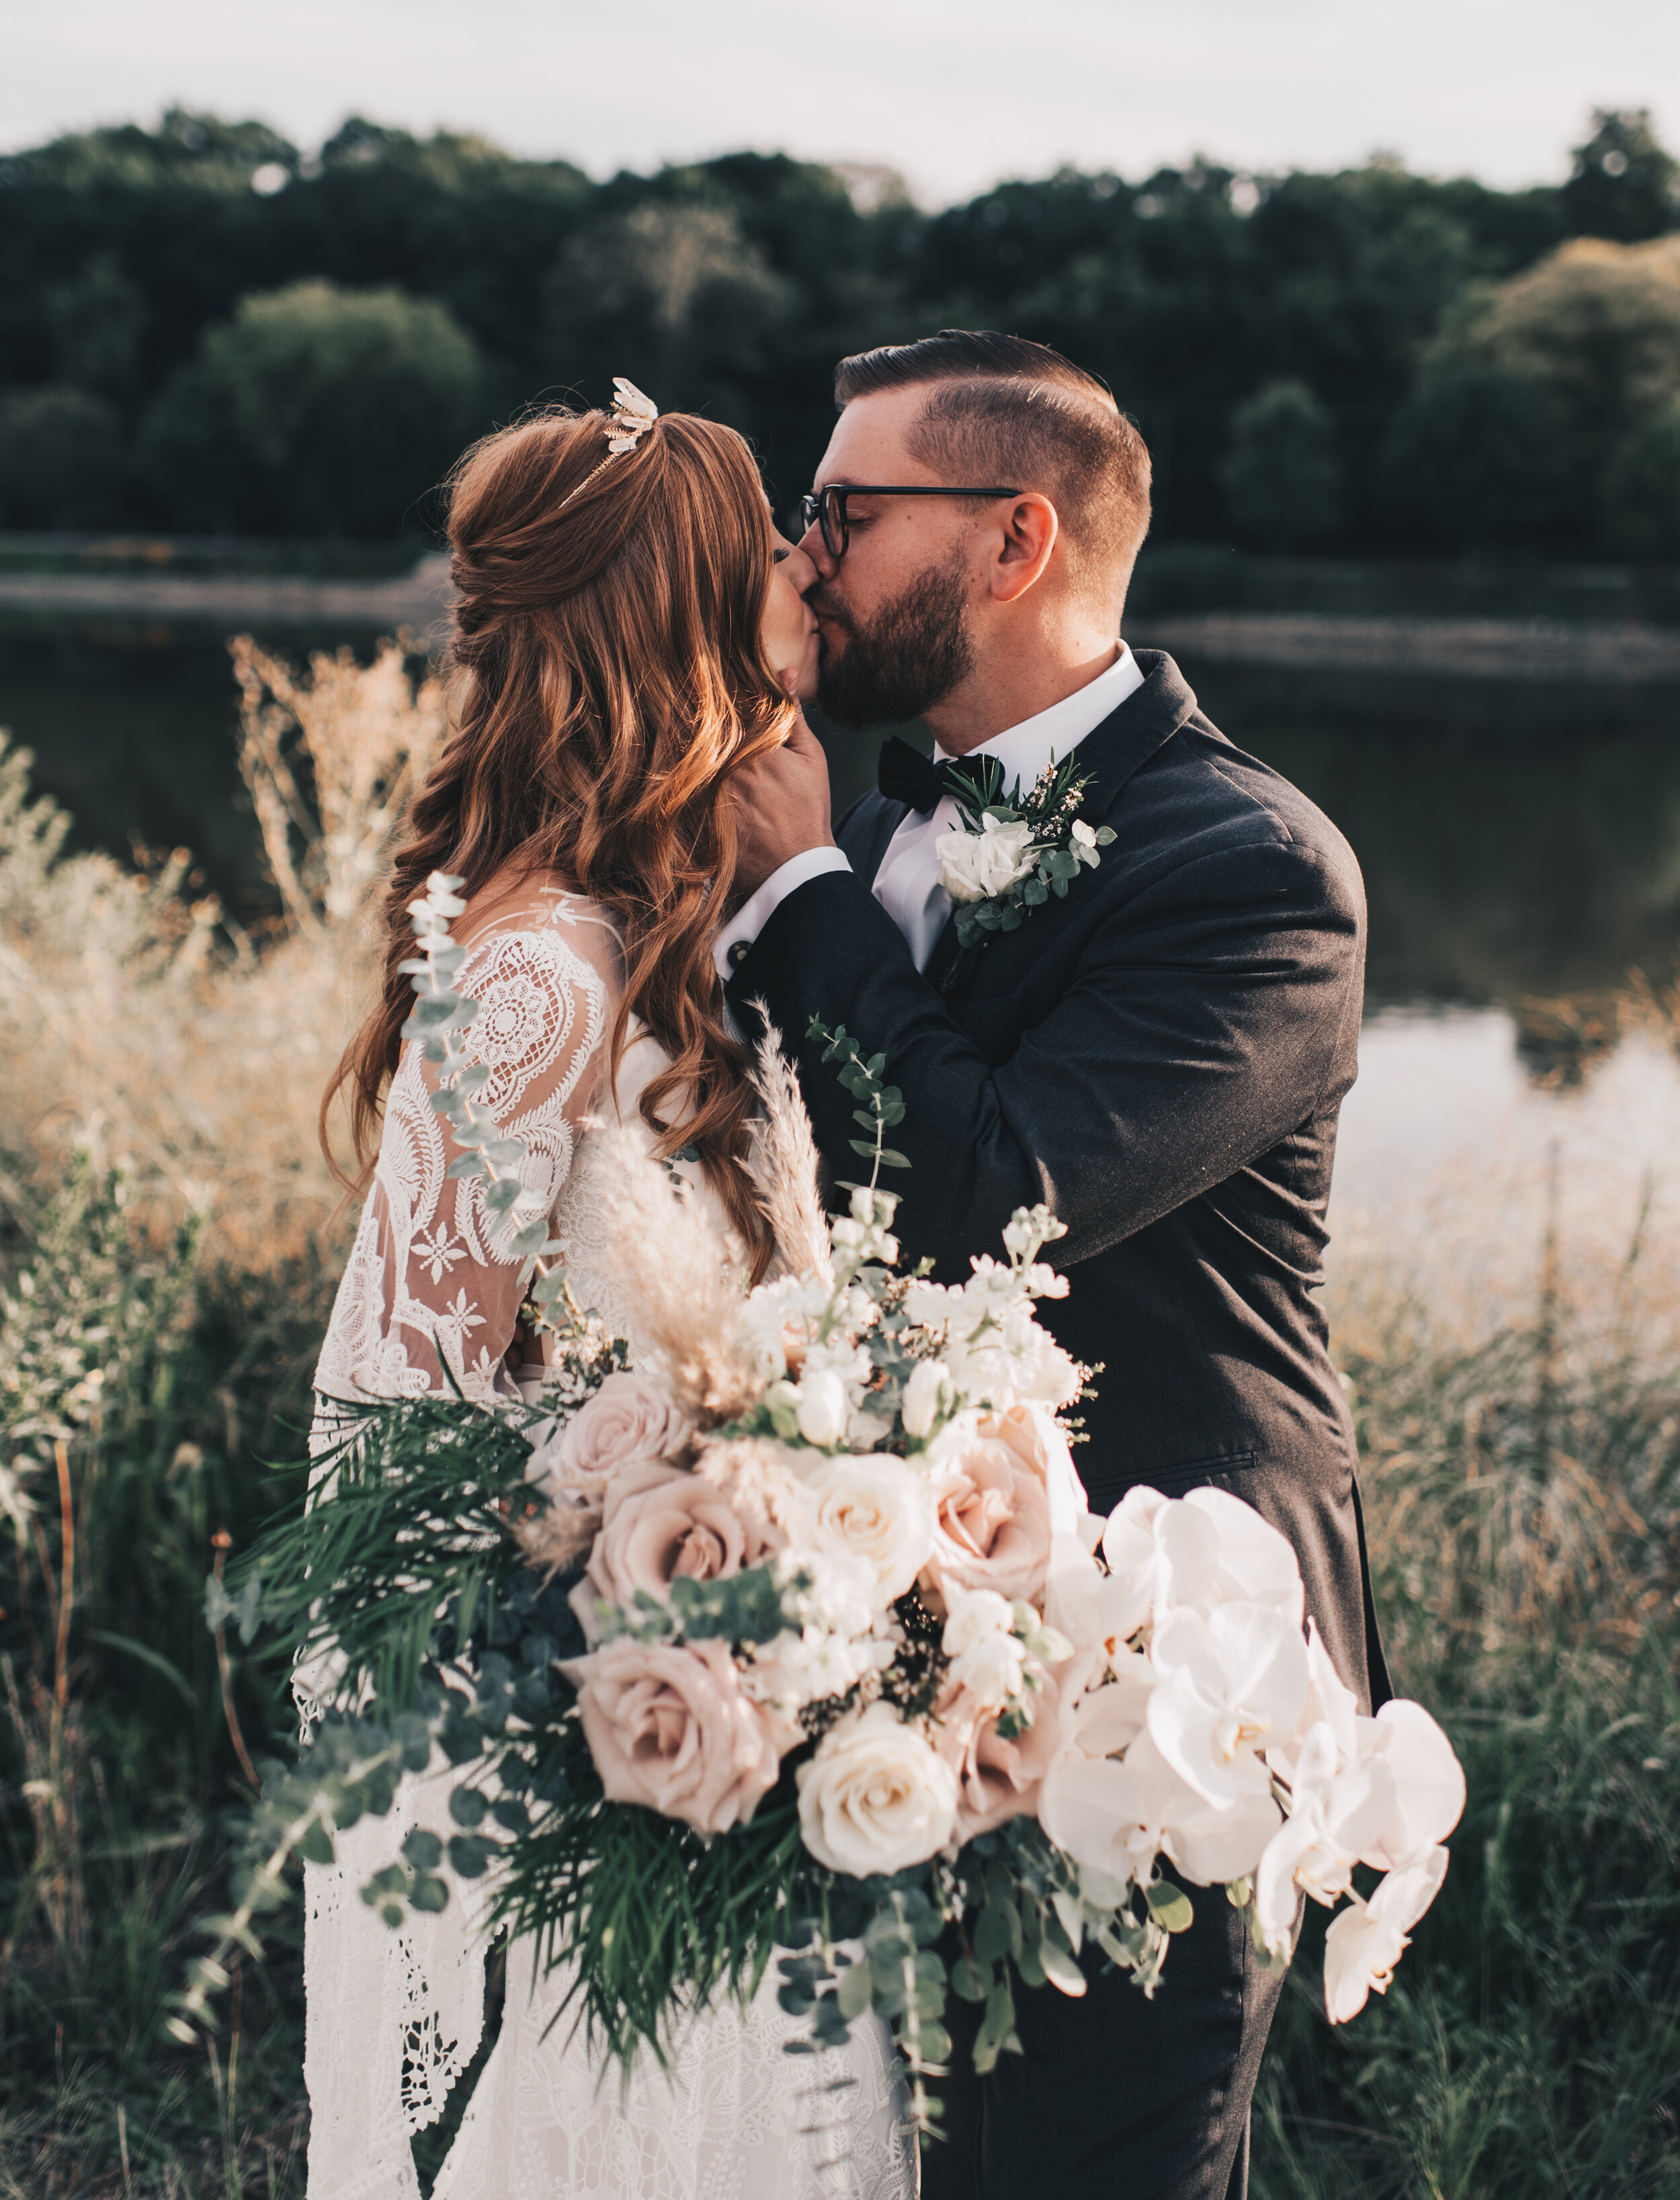 Modern Industrial Wedding, The Brix on the Fox, The BRIX, Chicago Industrial Wedding, Modern Midwest Wedding, The Brix on the Fox Wedding, The BRIX Wedding, Outdoor Boho Bride and Groom Photos